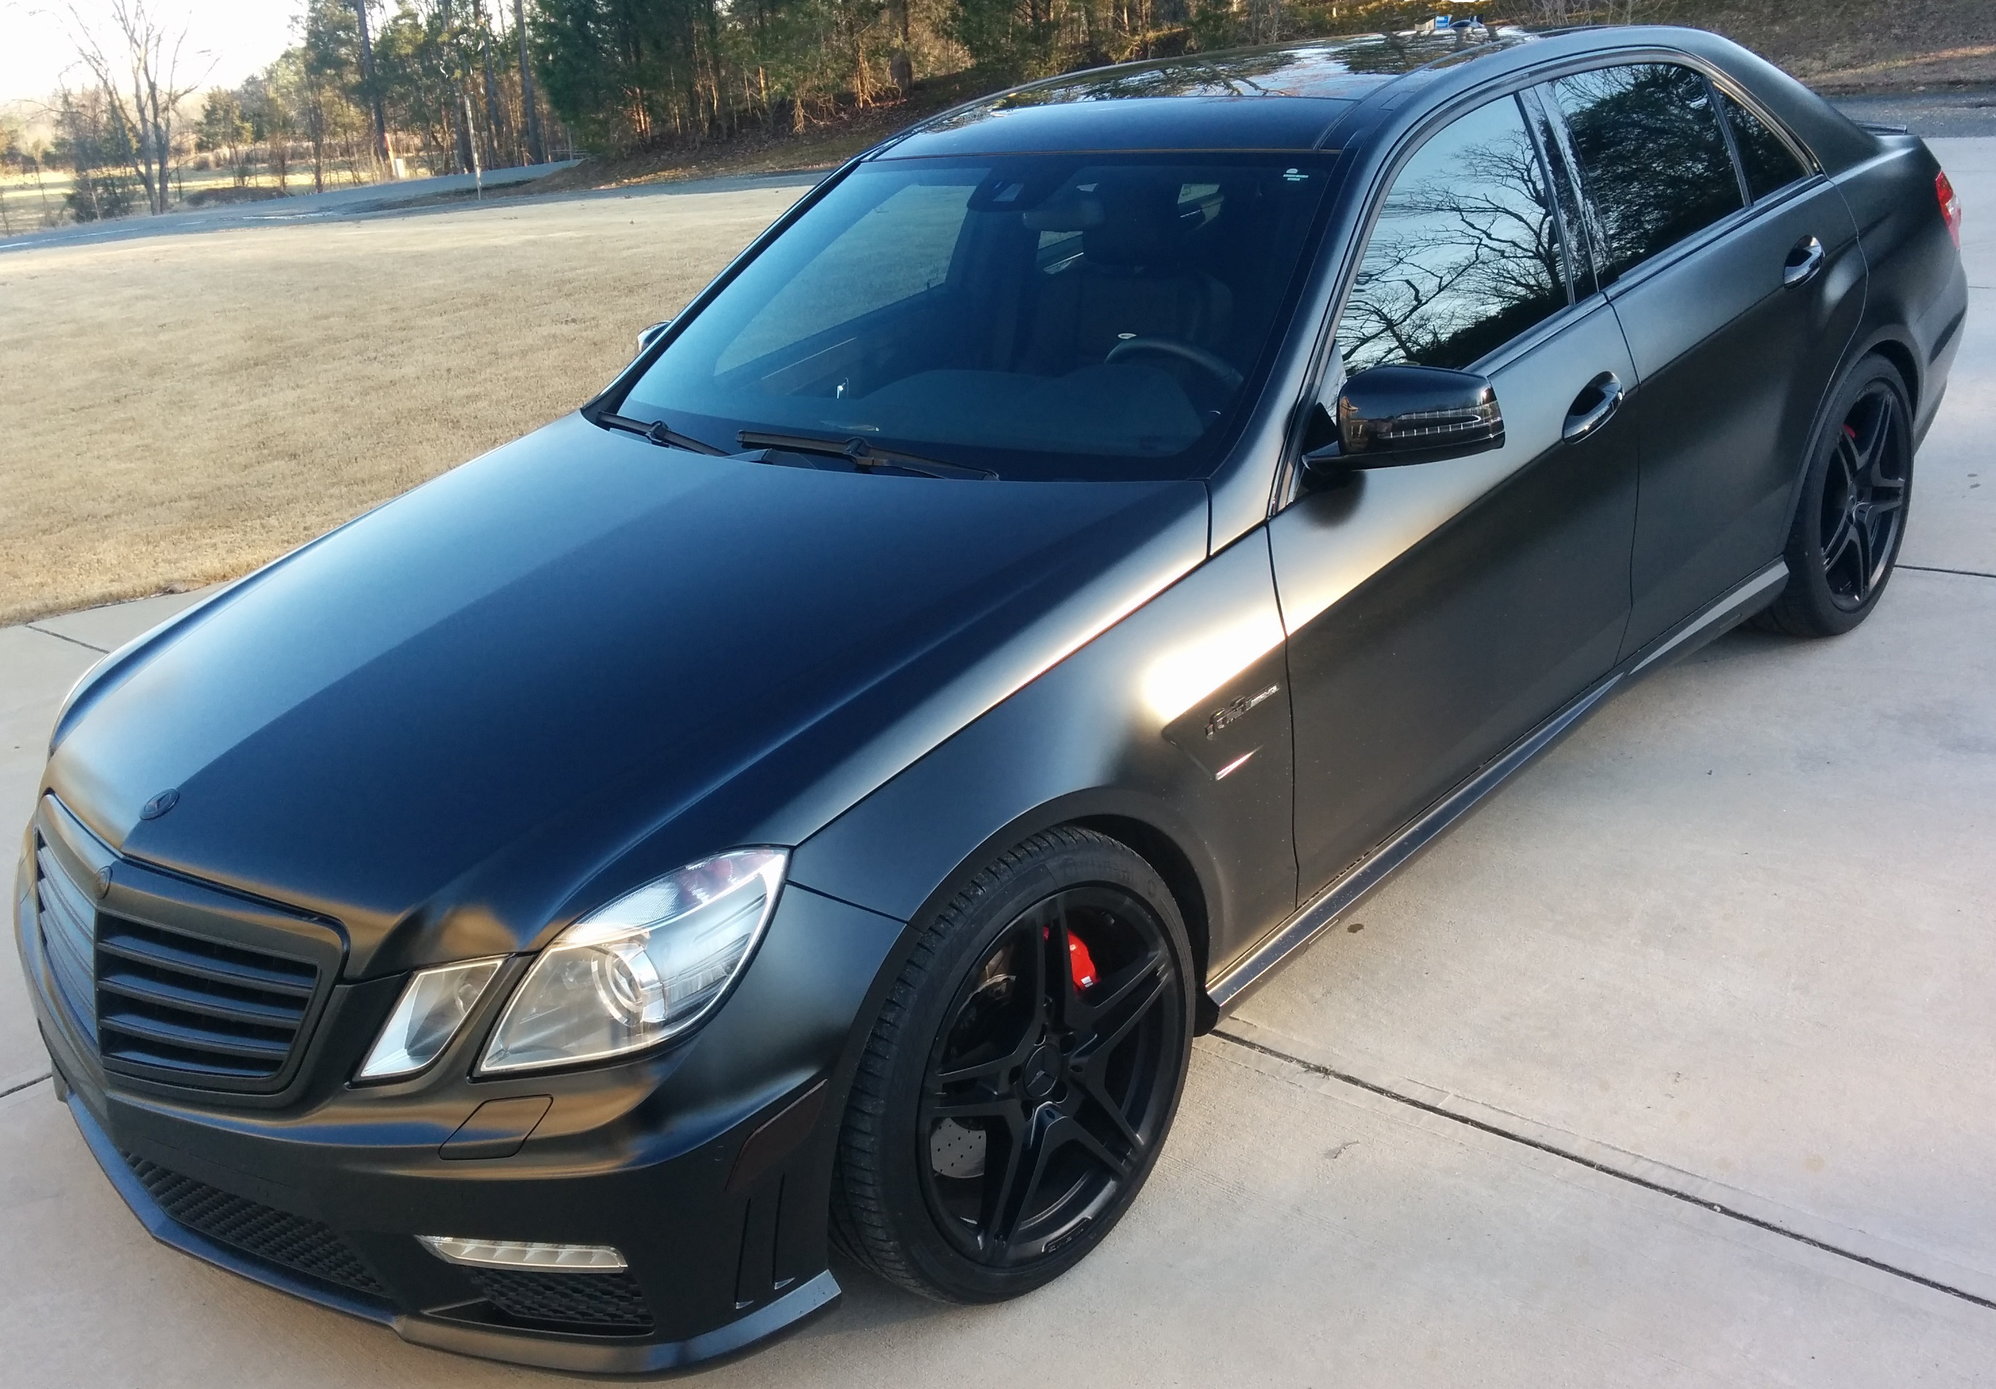 2011 Mercedes-Benz E63 AMG - 2011 E63 Low Miles, Gorgeous Mercedes Matte Black paint (paint 3 years old) - Used - VIN WDDHF7HB8BA407700 - 57,000 Miles - 8 cyl - 2WD - Automatic - Sedan - Black - Harrisburg, NC 28075, United States